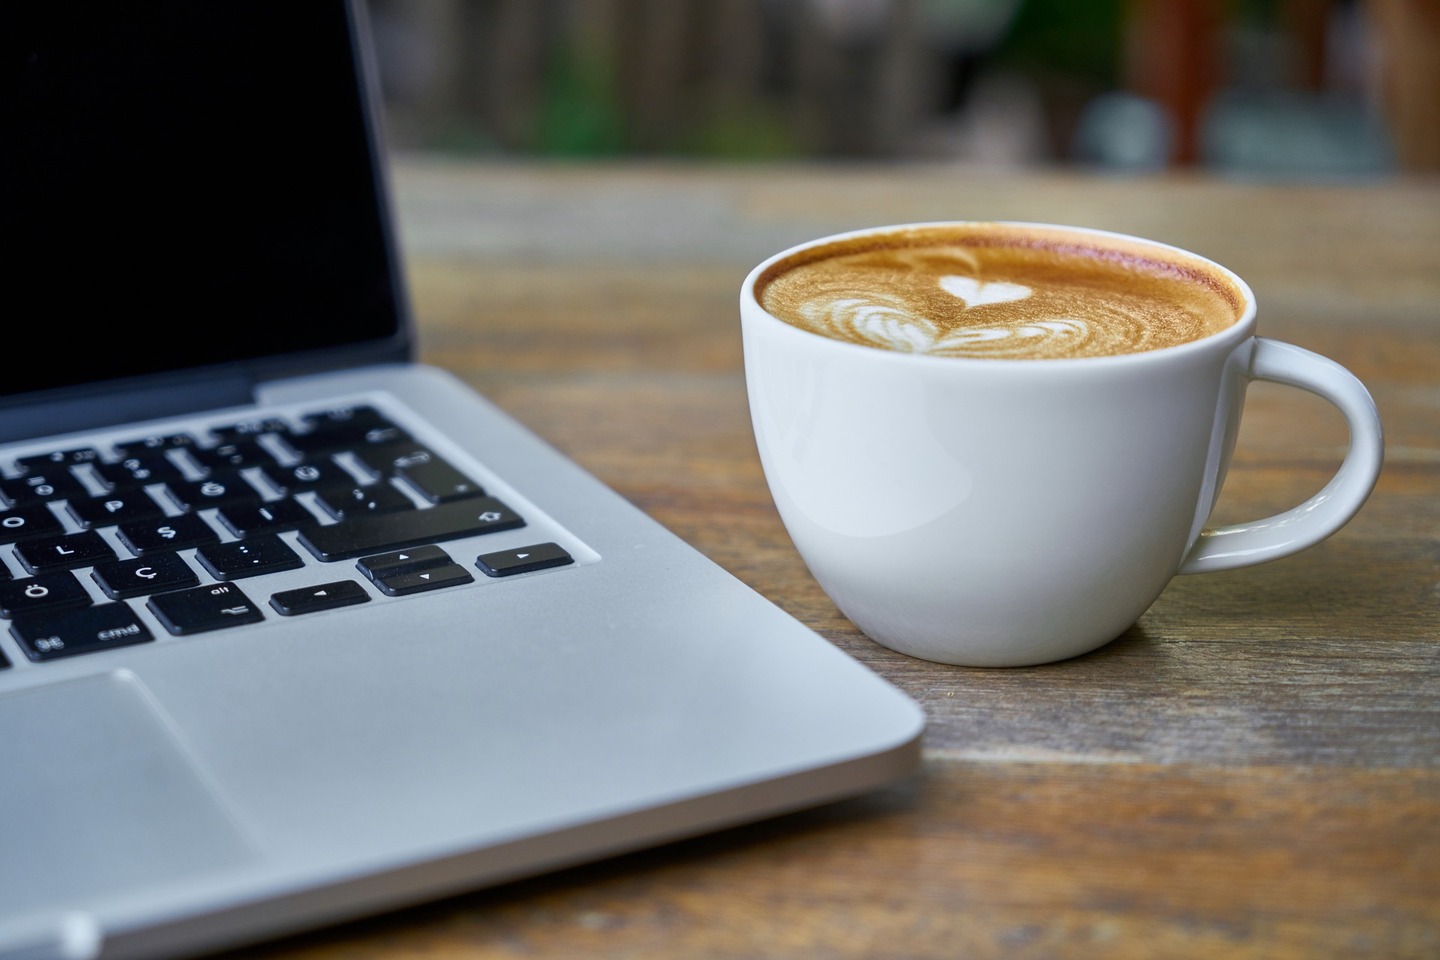 Cup of coffee next to a laptop on a table with an unfocused background